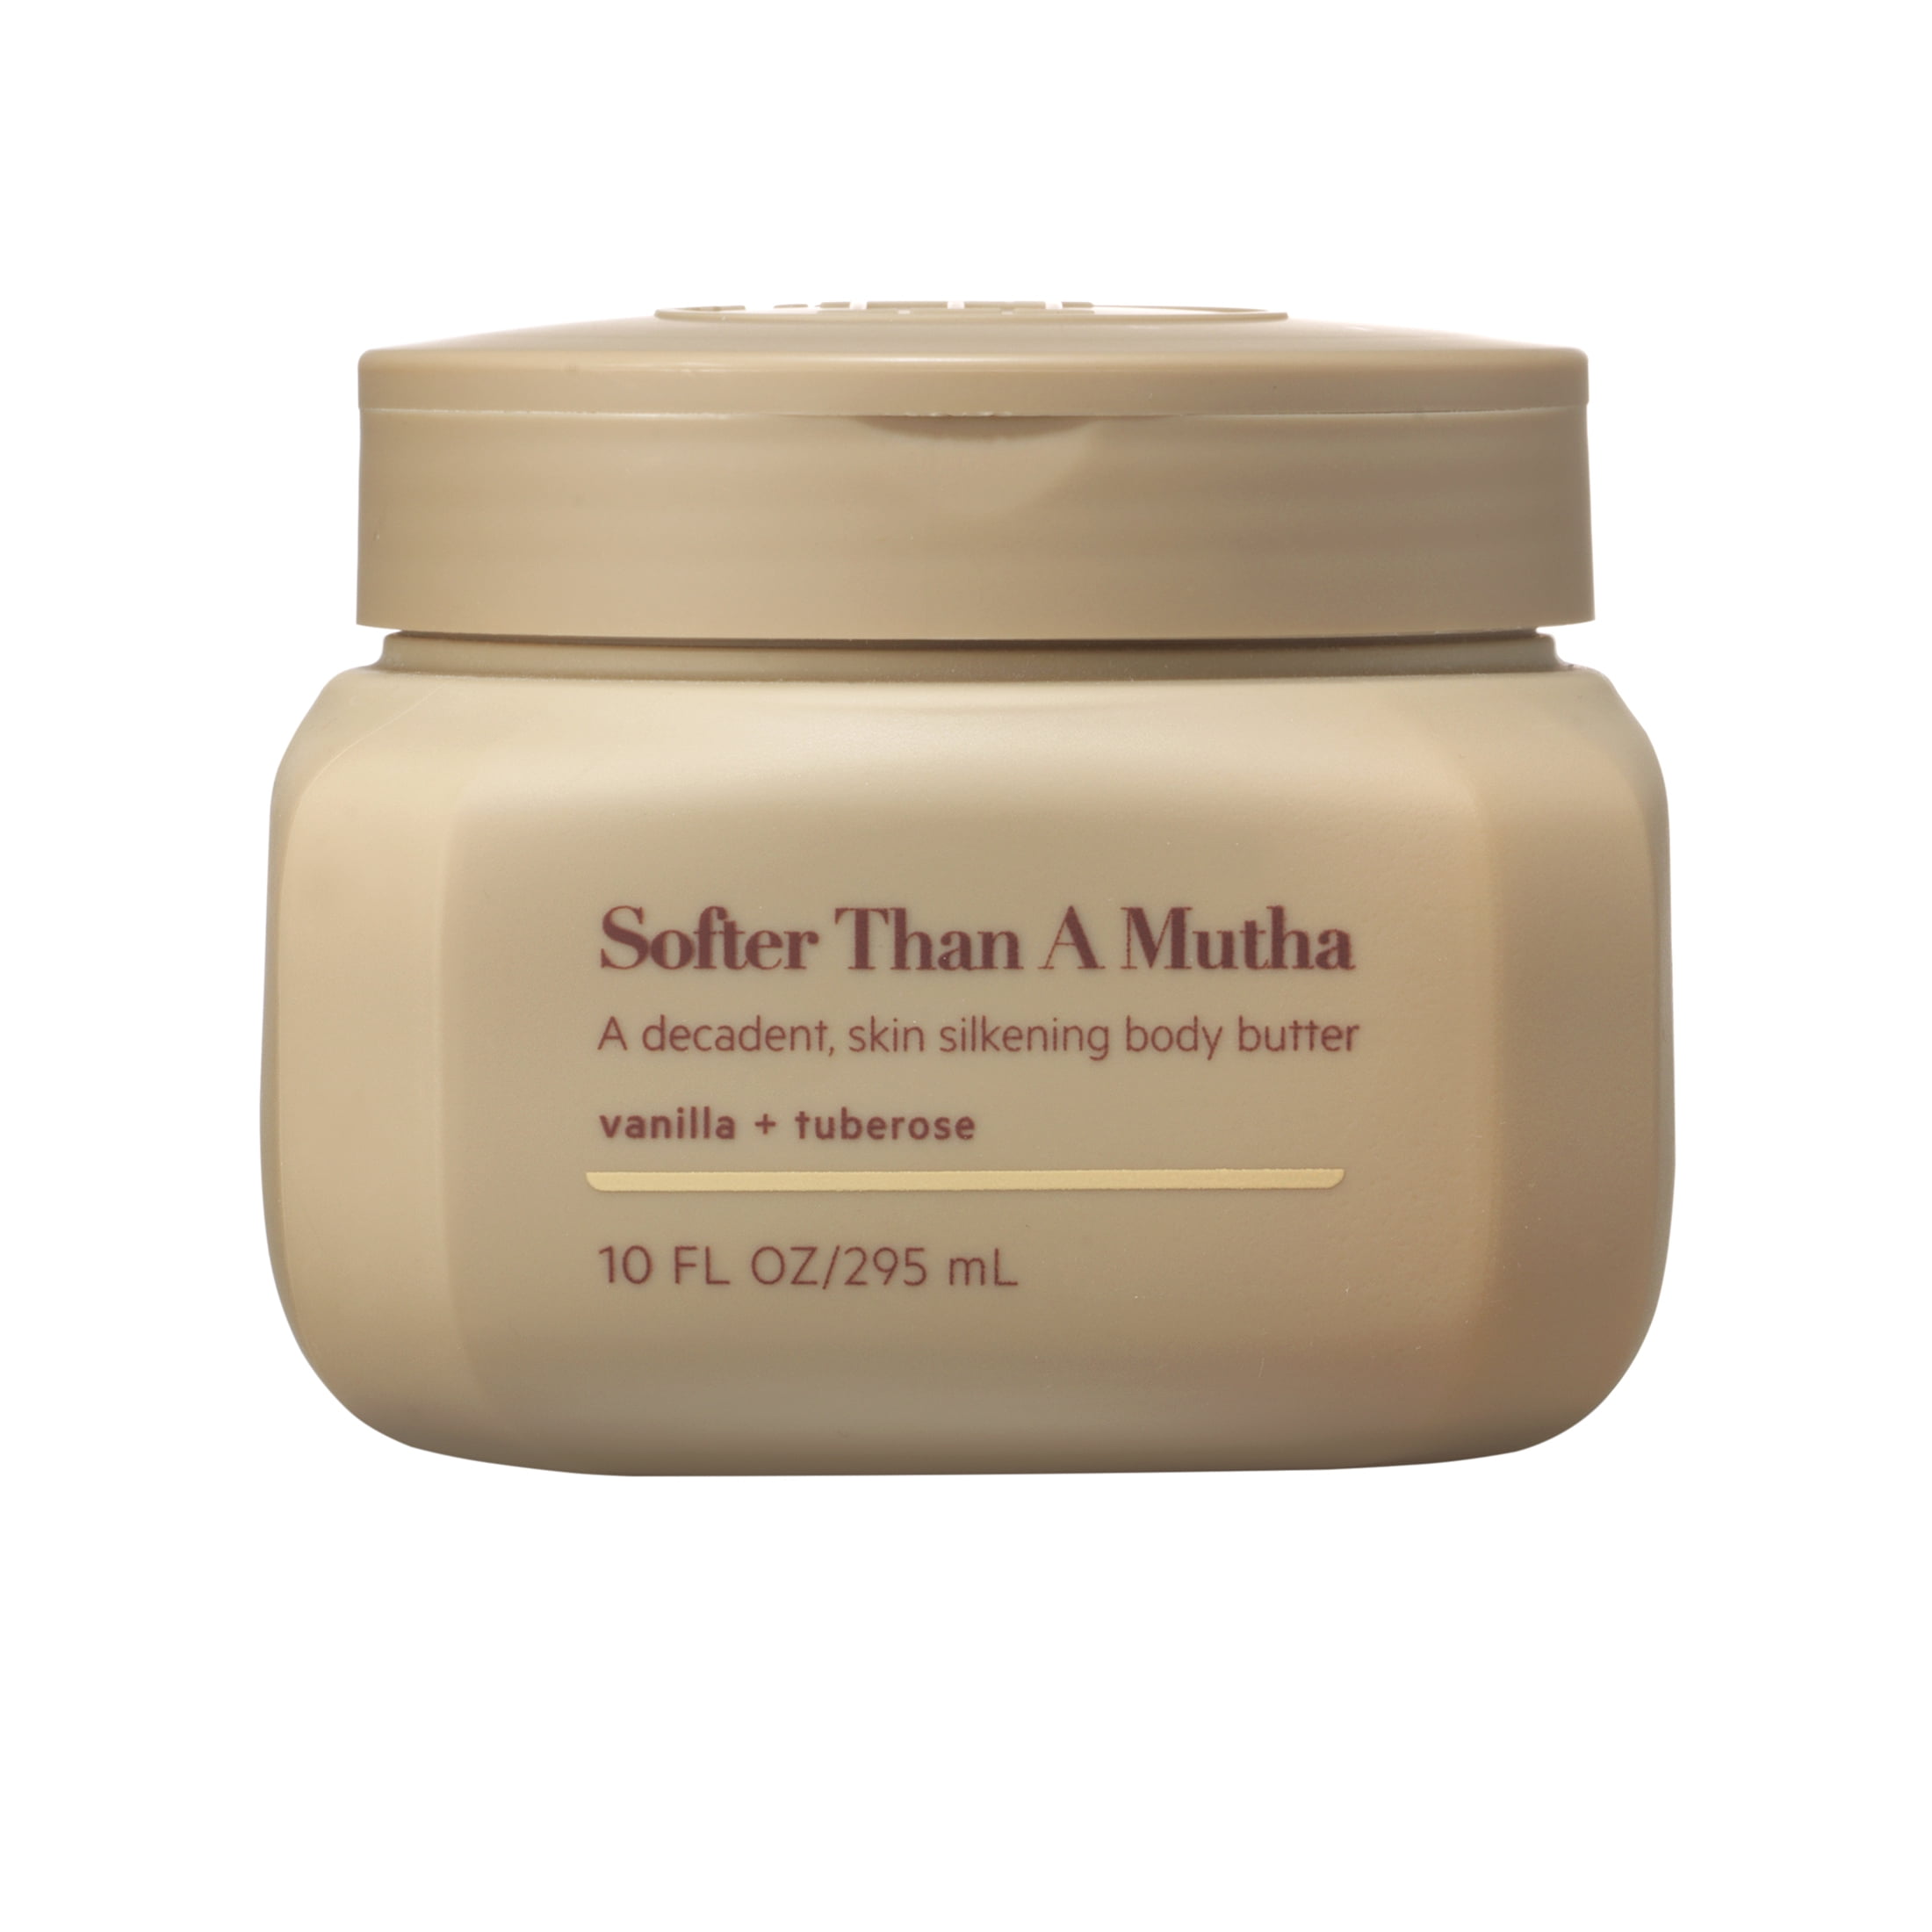 BODY BY TPH Softer Than A Mutha Vegan Softening Body Butter Cream with Shea Butter, Vitamin E & Moringa Oil for Dry Skin | Deep Body Lotion for Women & Men, 10 fl. oz